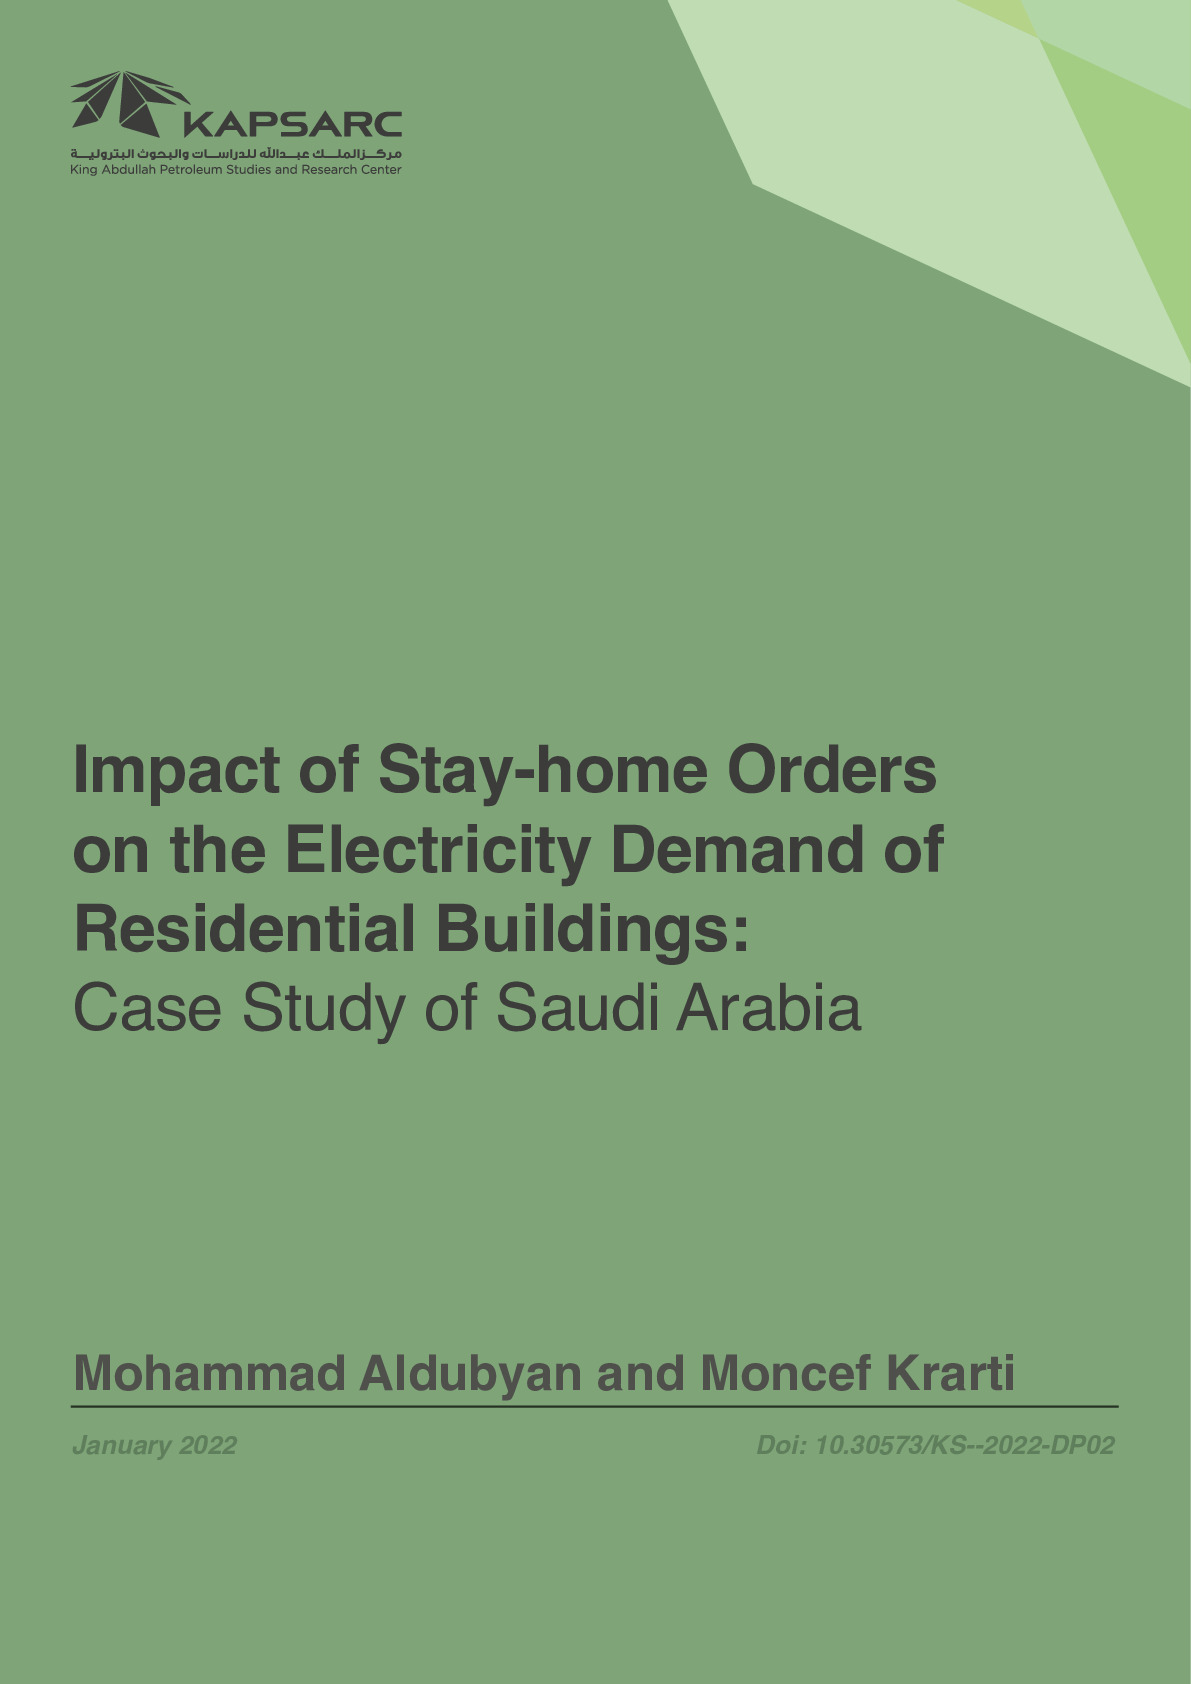 Impact of Stay-home Orders on the Electricity Demand of Residential Buildings: Case Study of Saudi Arabia